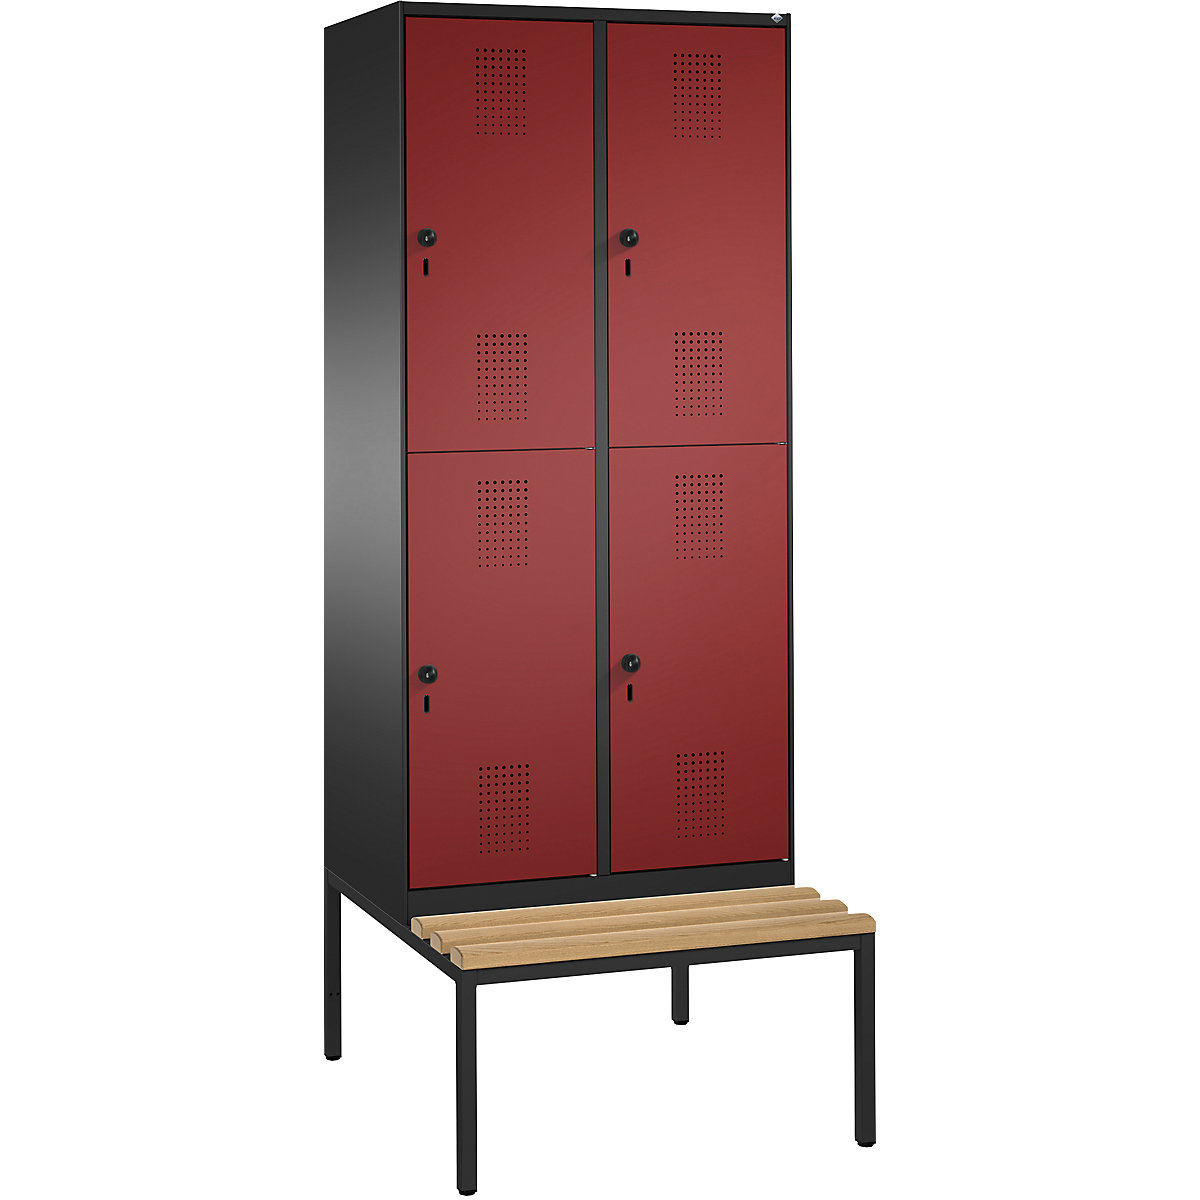 EVOLO cloakroom locker, double tier, with bench – C+P, 2 compartments, 2 shelf compartments each, compartment width 400 mm, black grey / ruby red-6